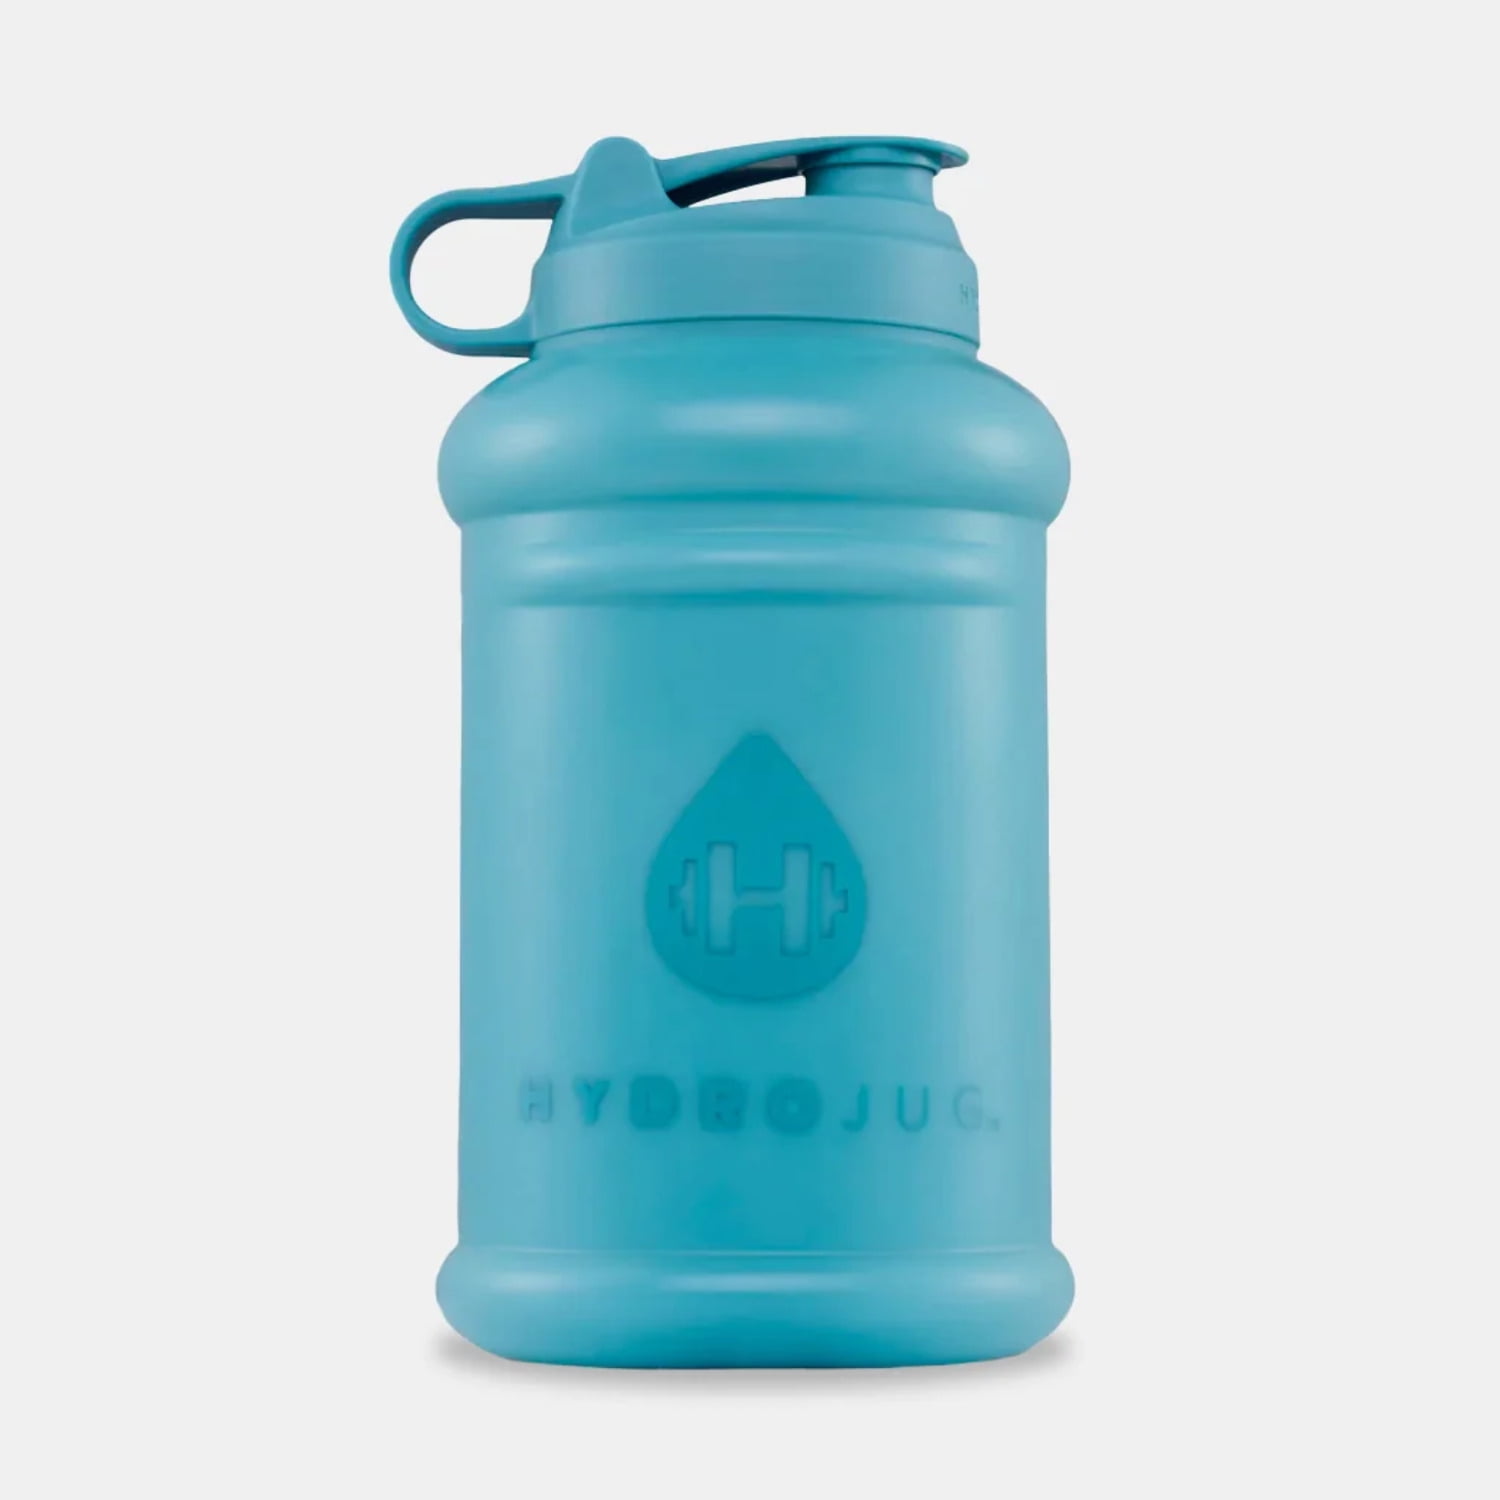 Your Guide to Choosing the Best Big Water Bottles - HydroJug